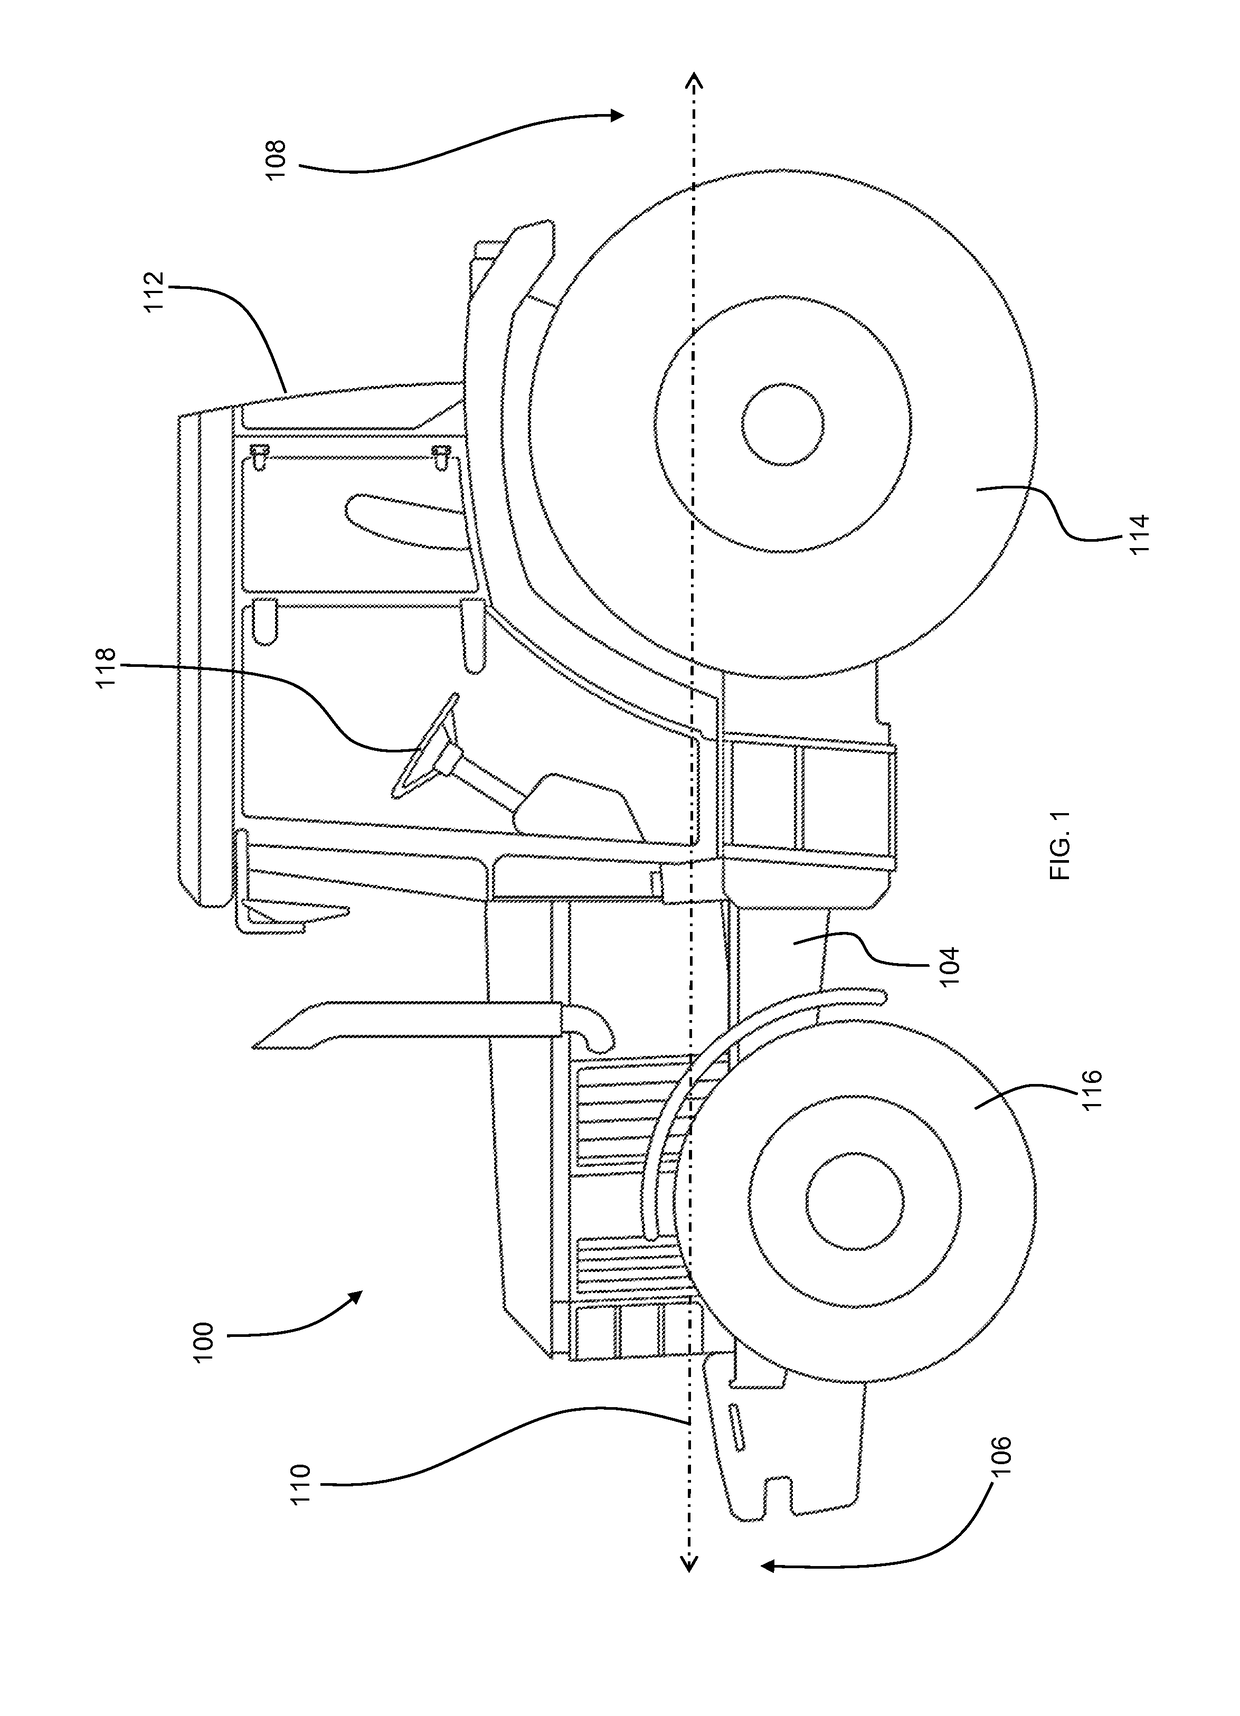 Rear mounted rotating mower assembly